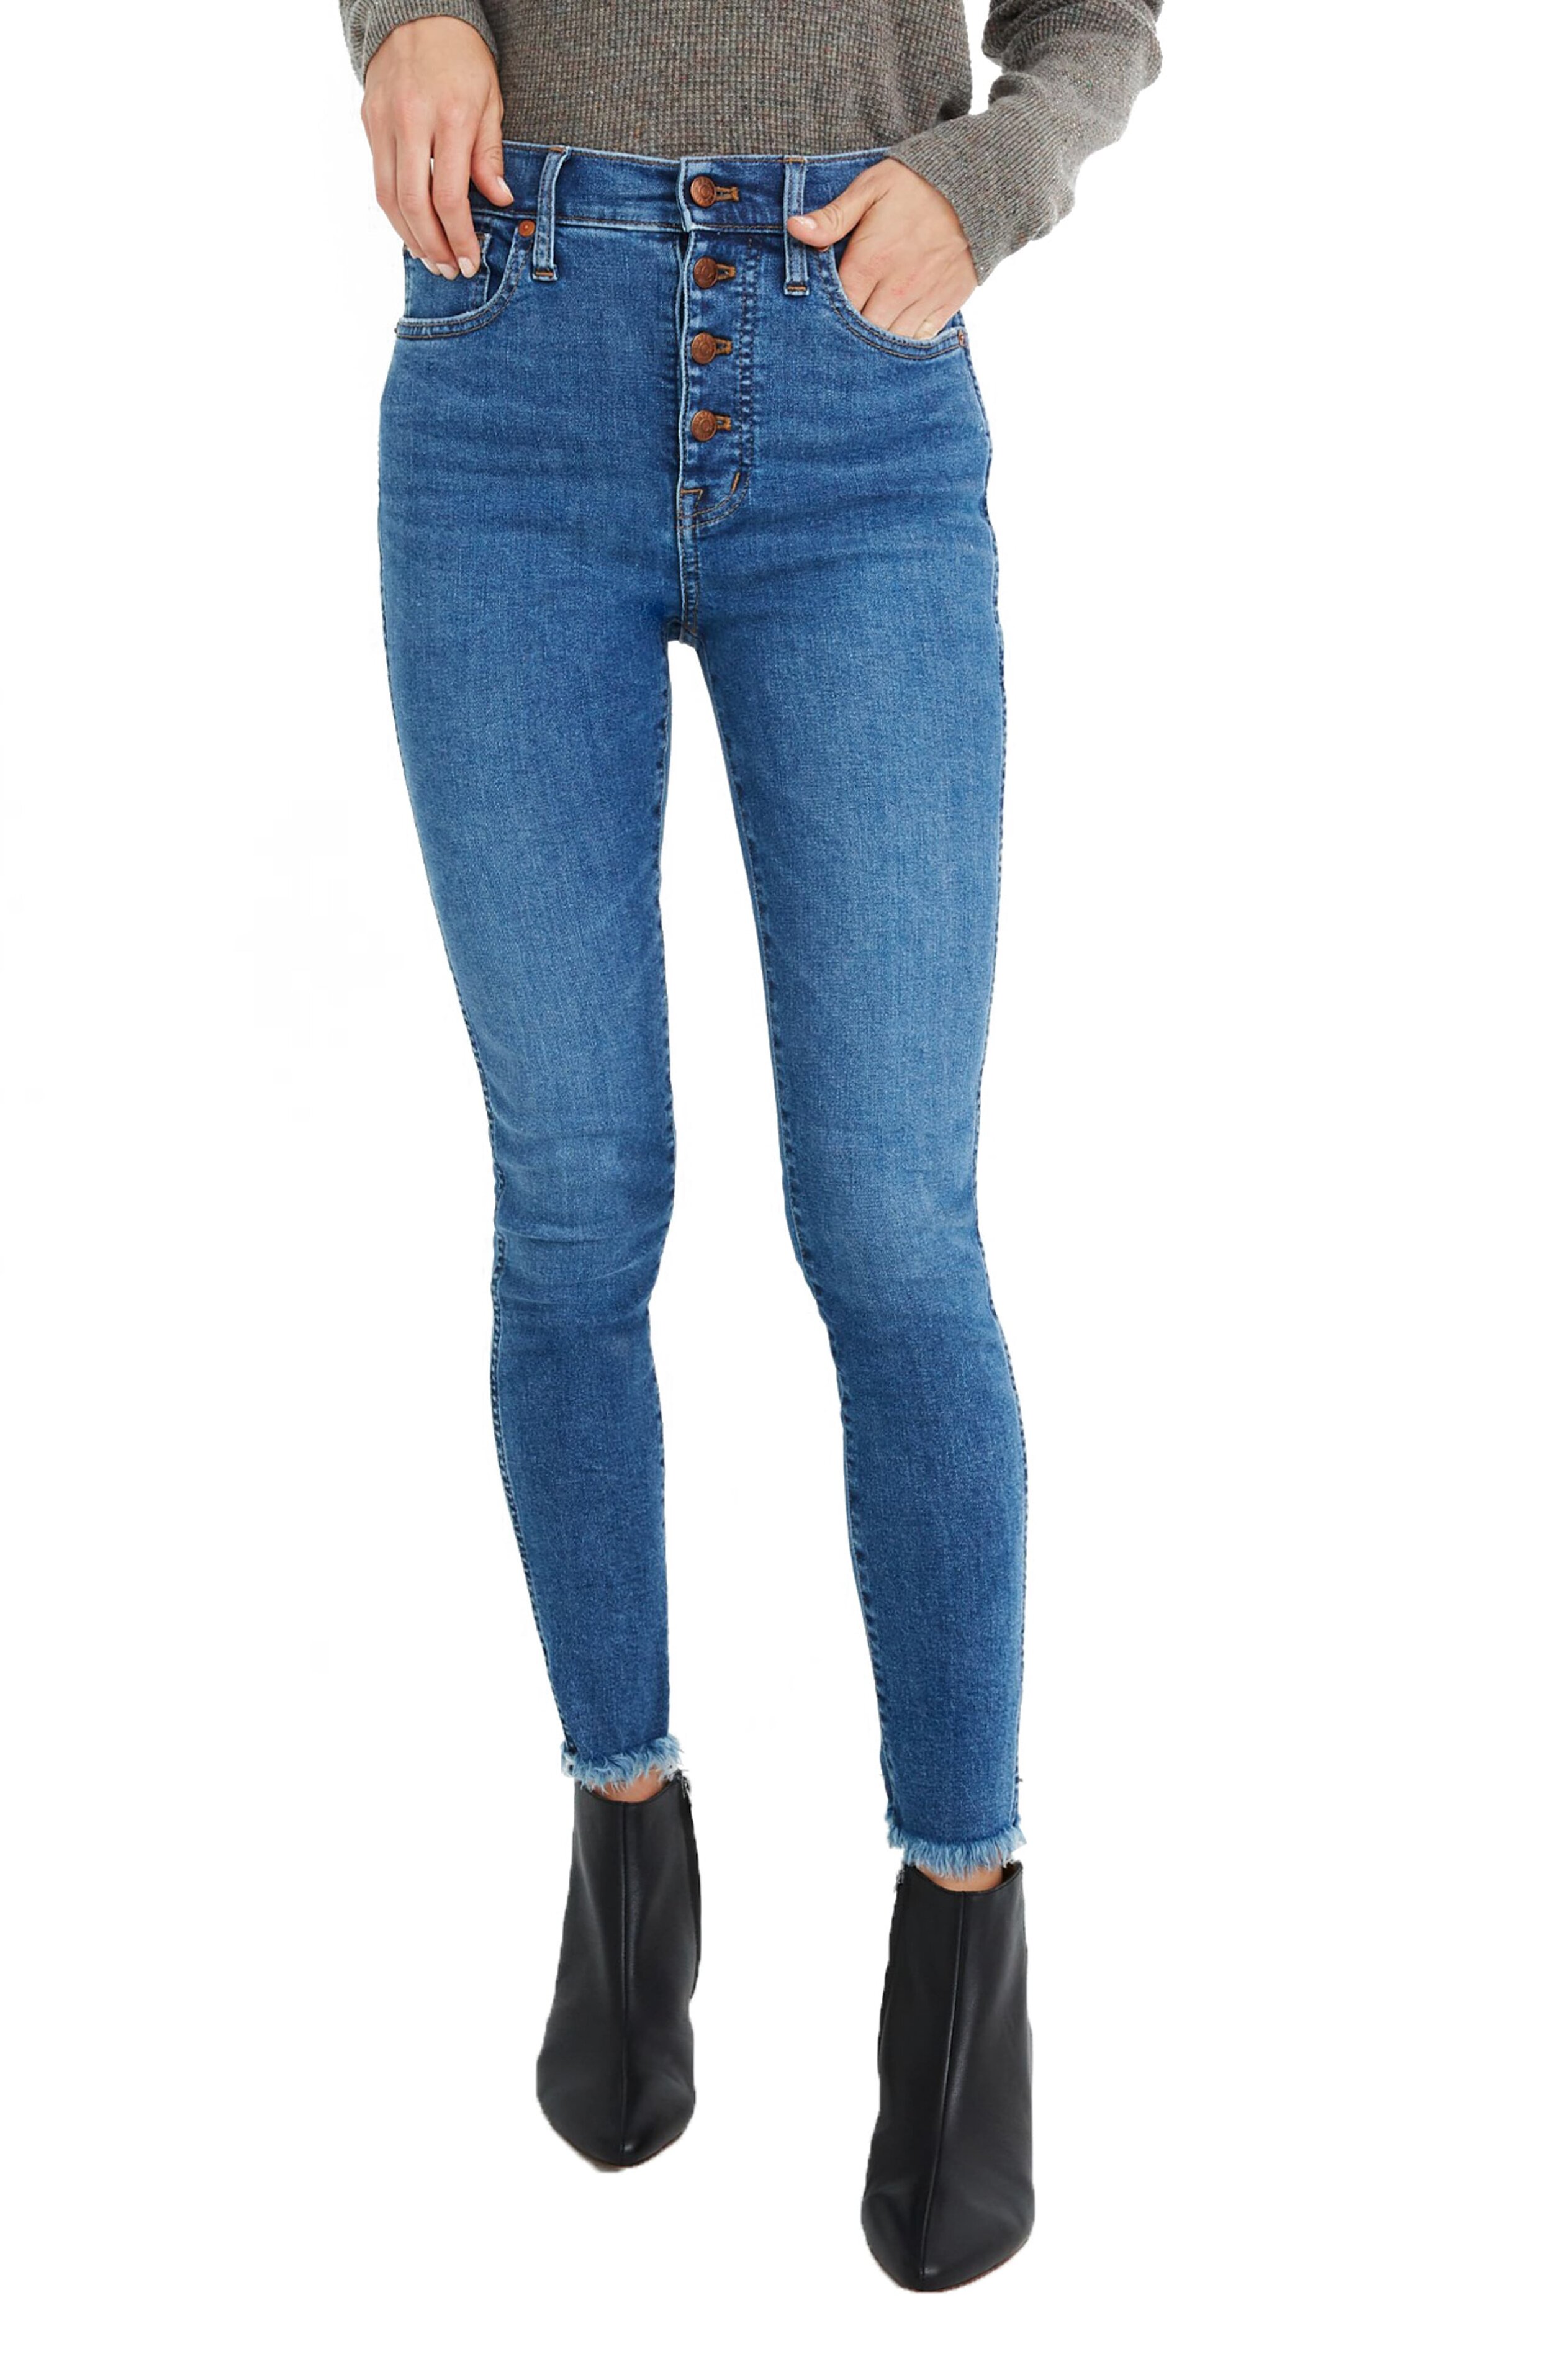 Madewell Button Front Skinny Jeans.jpeg